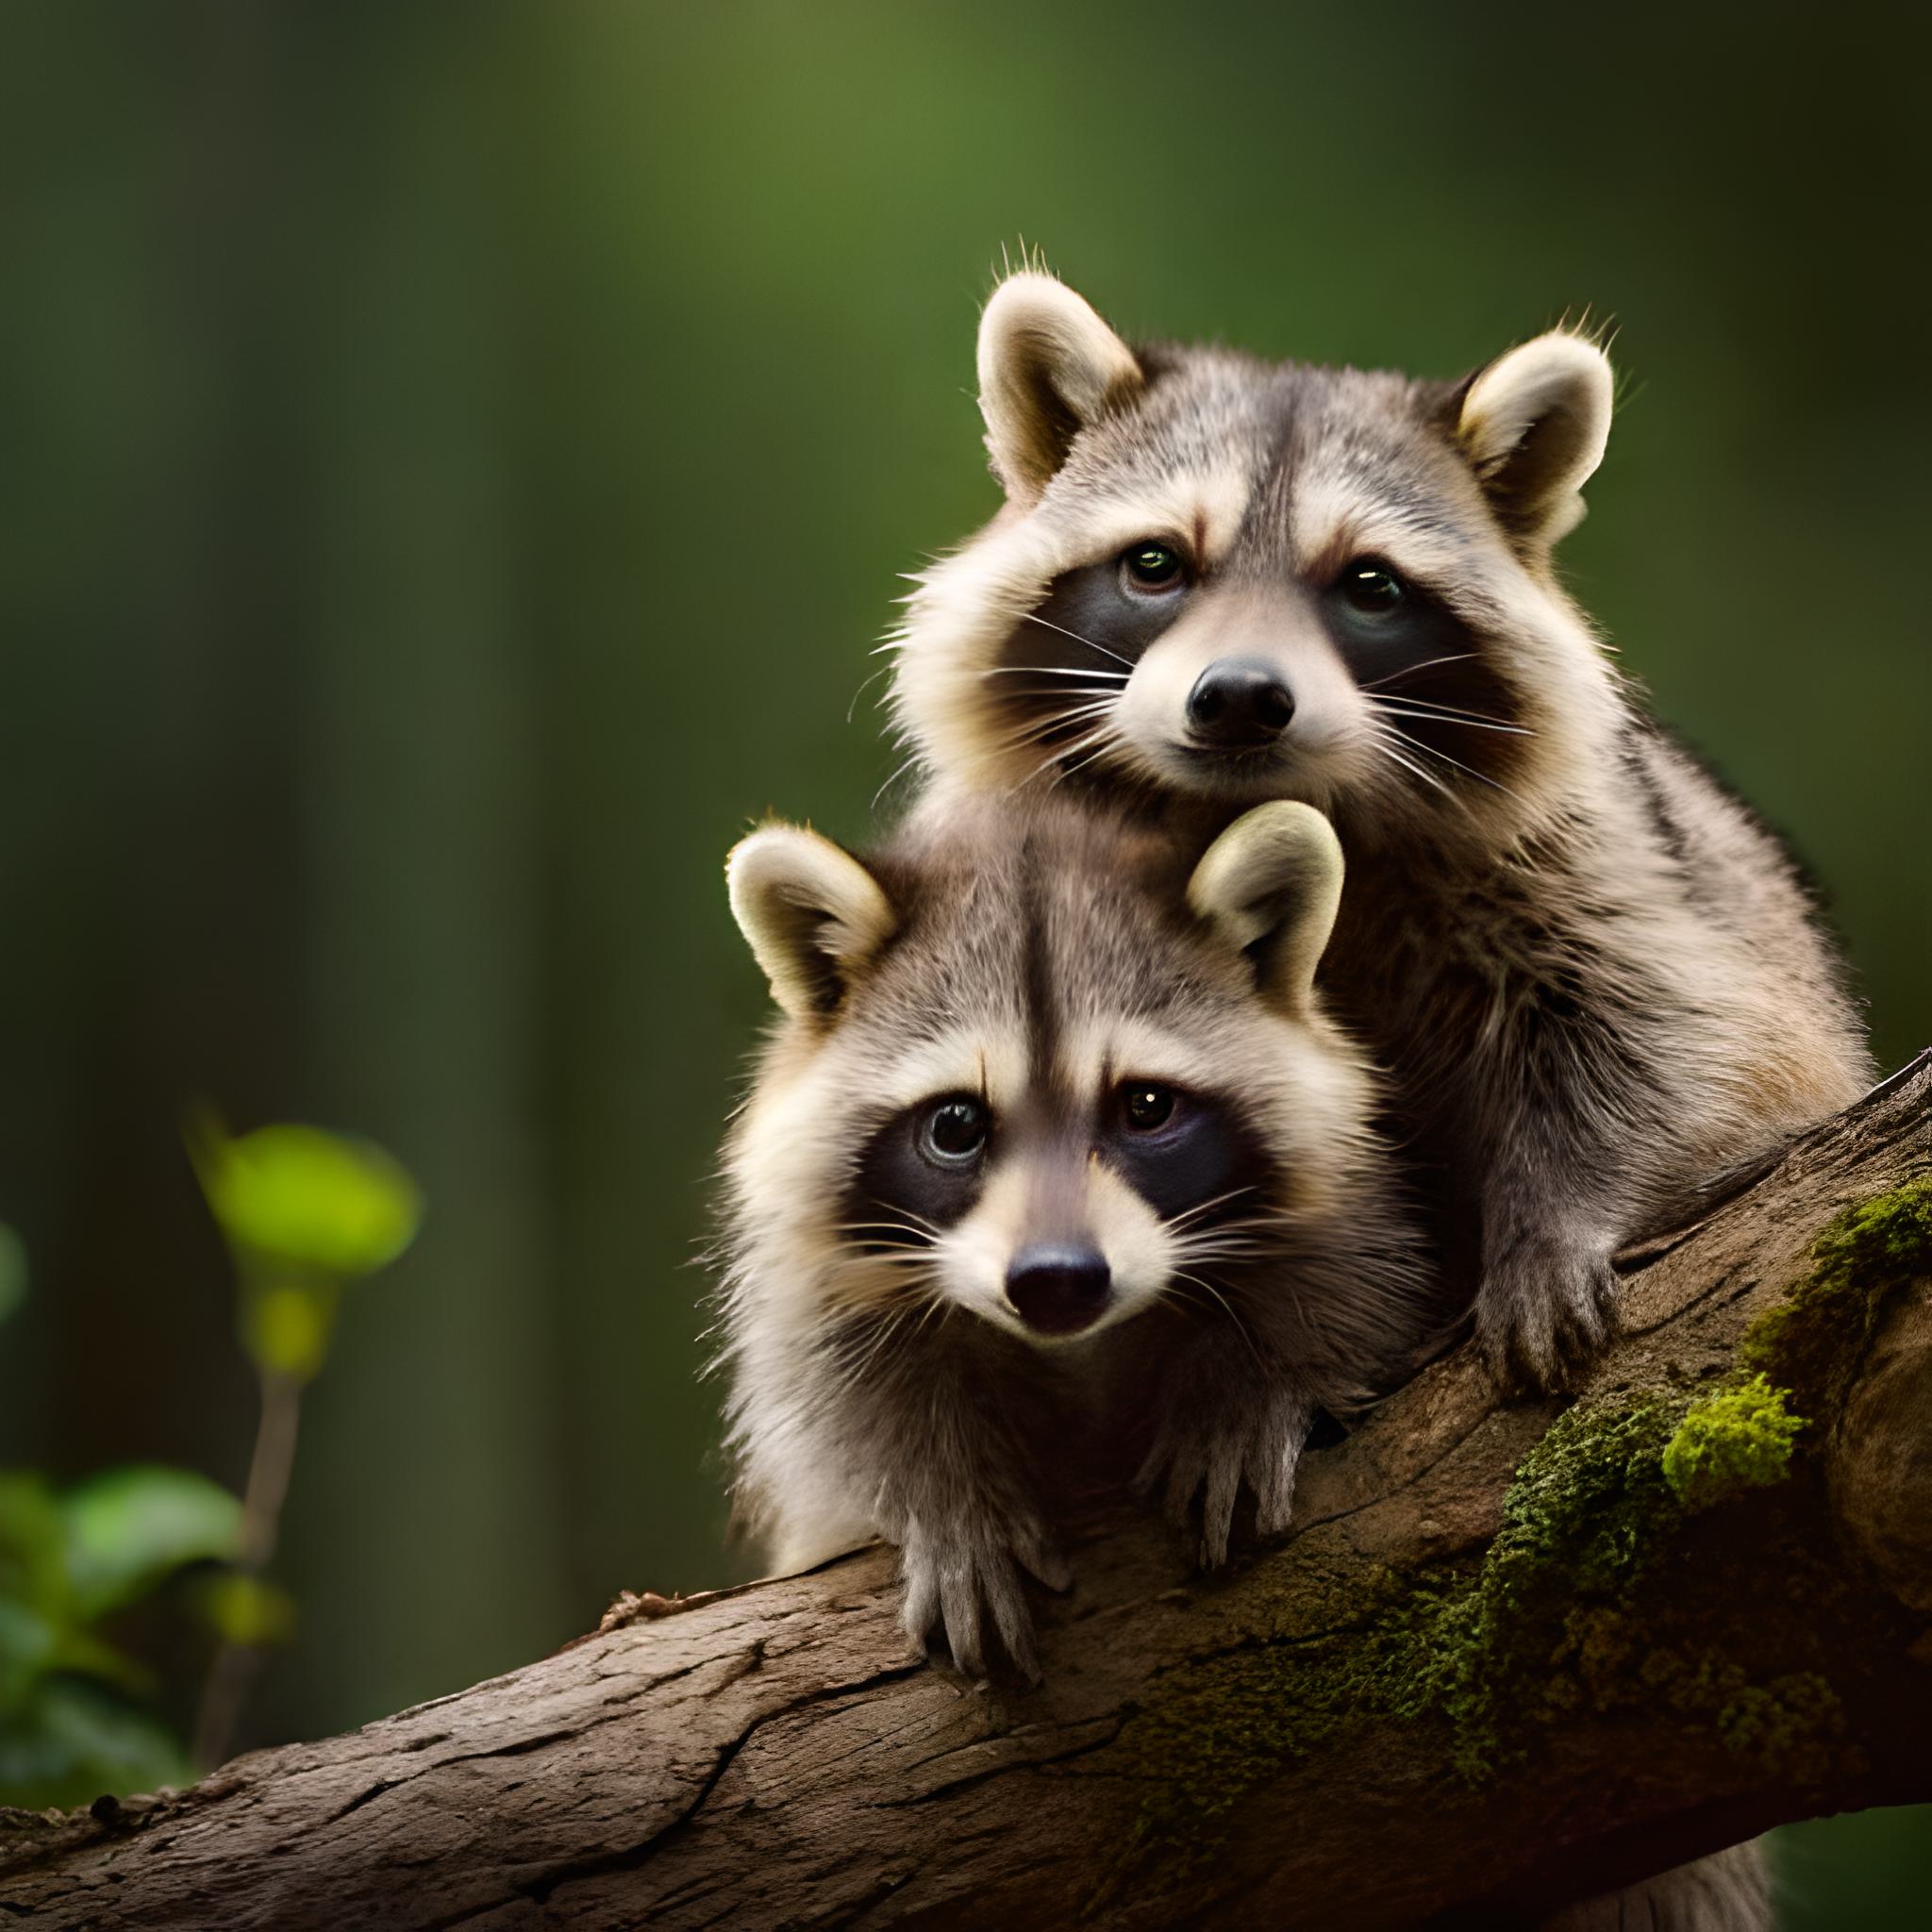 Two raccoons together